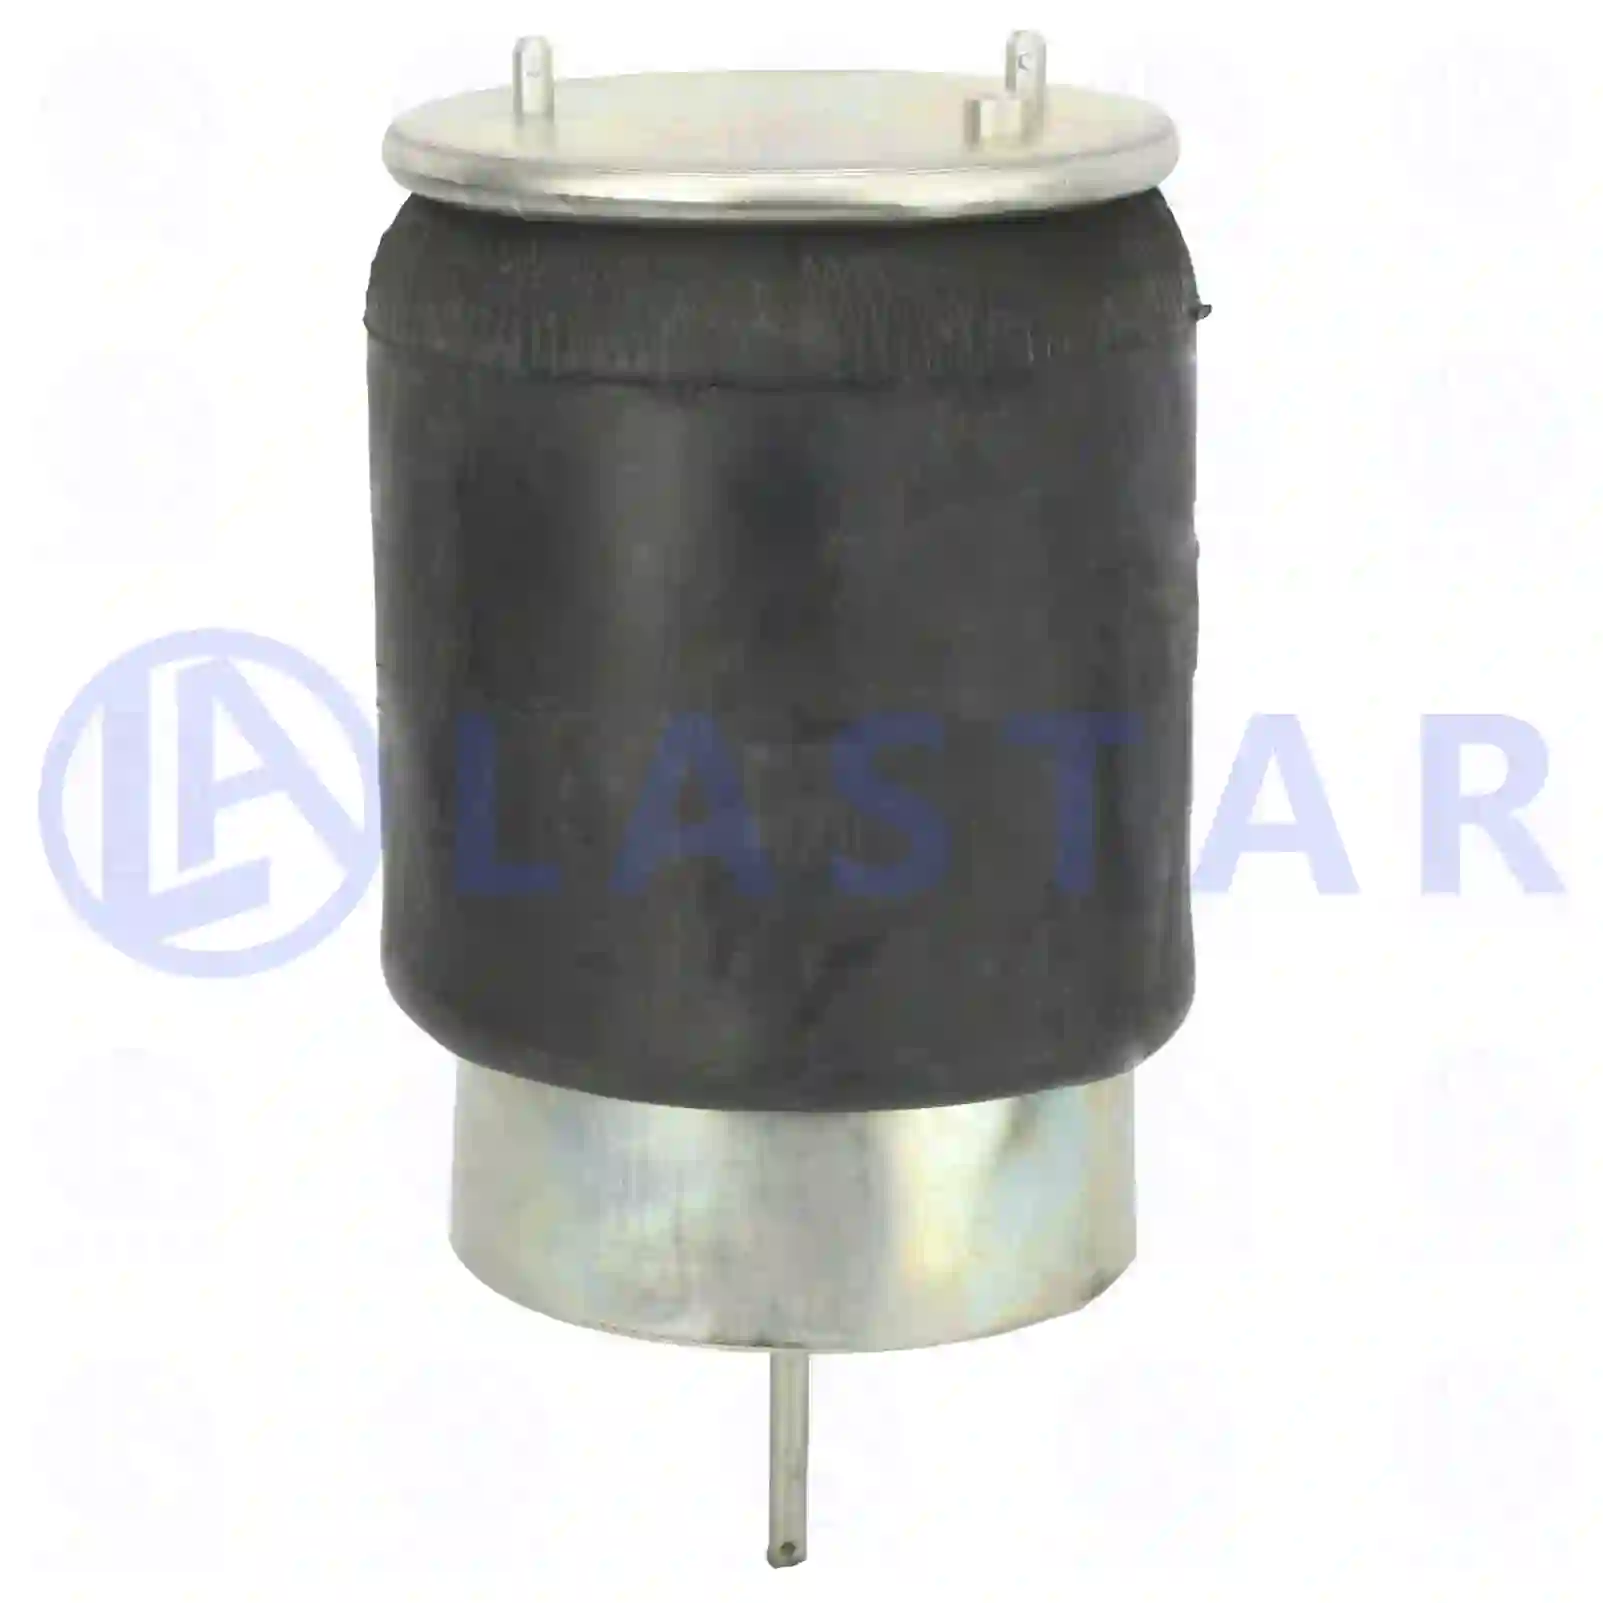  Air spring, with steel piston || Lastar Spare Part | Truck Spare Parts, Auotomotive Spare Parts